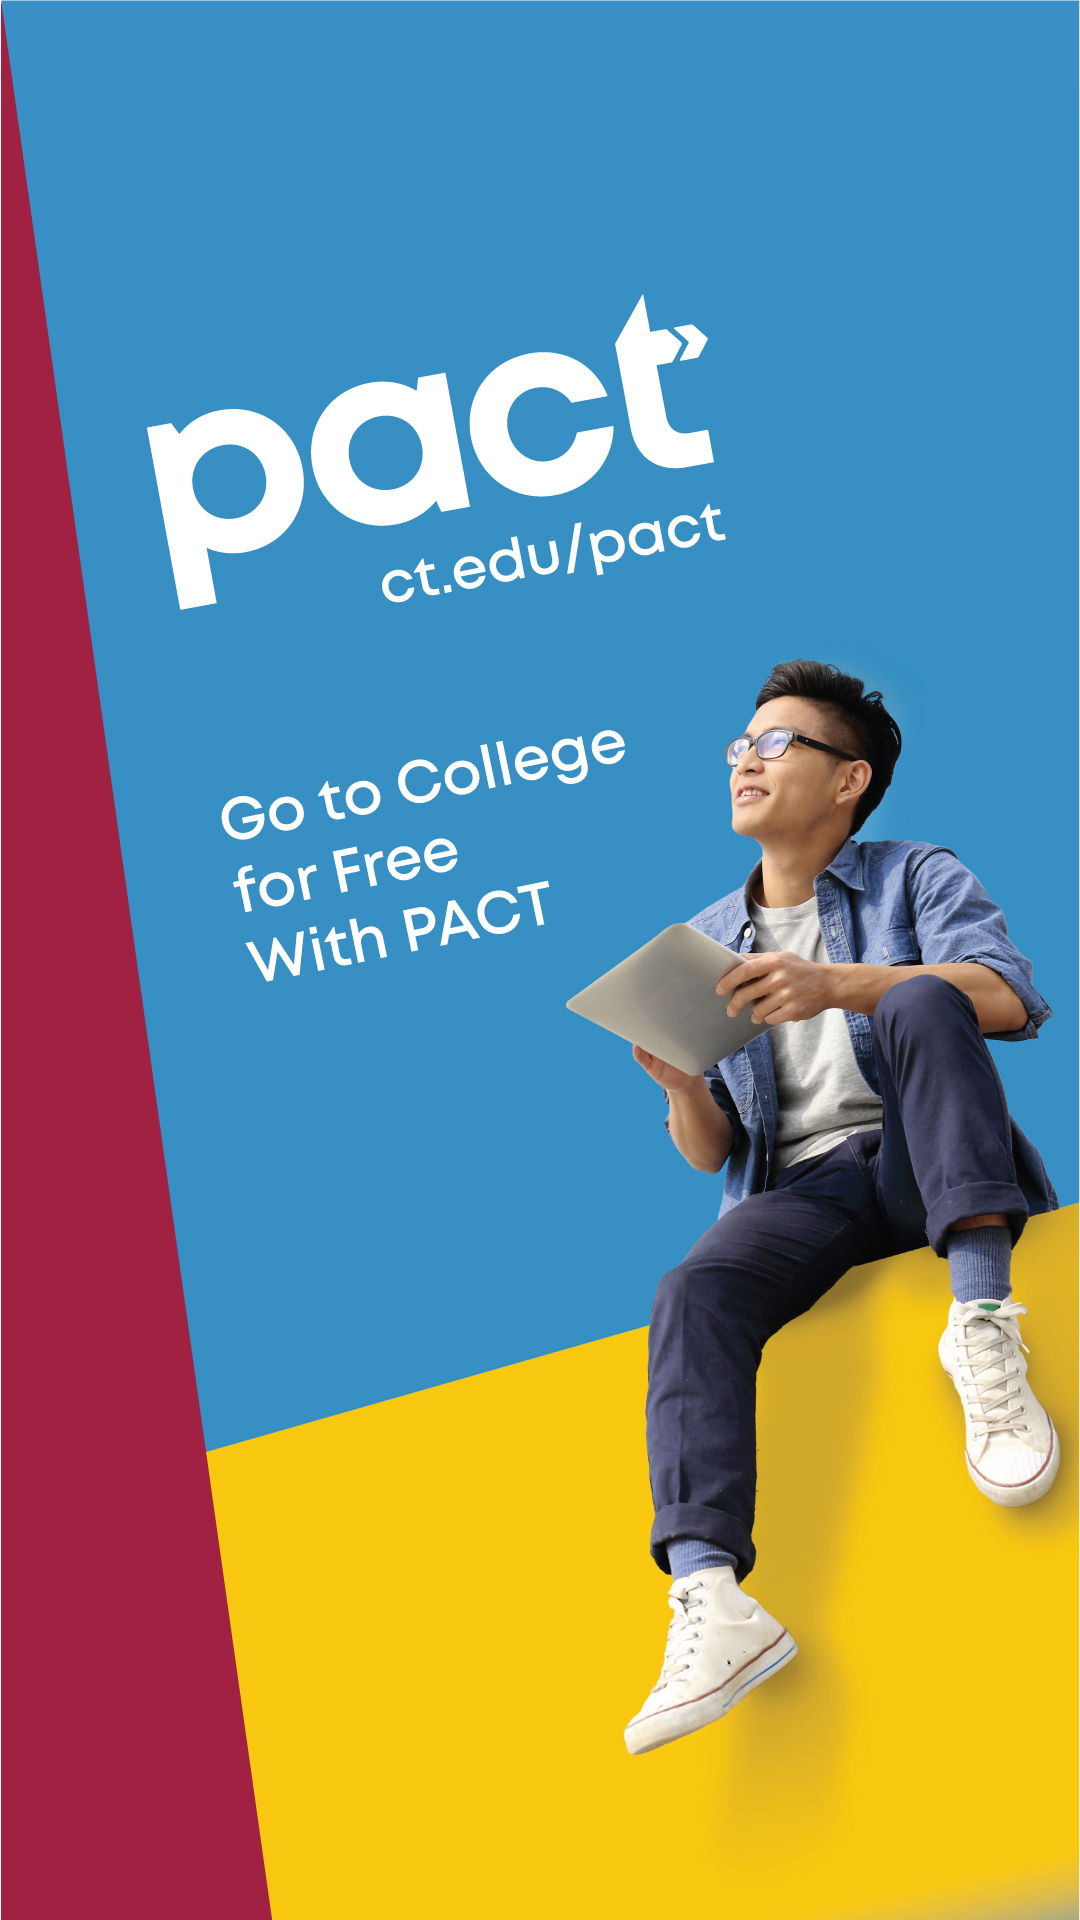 Go to college for free with PACT